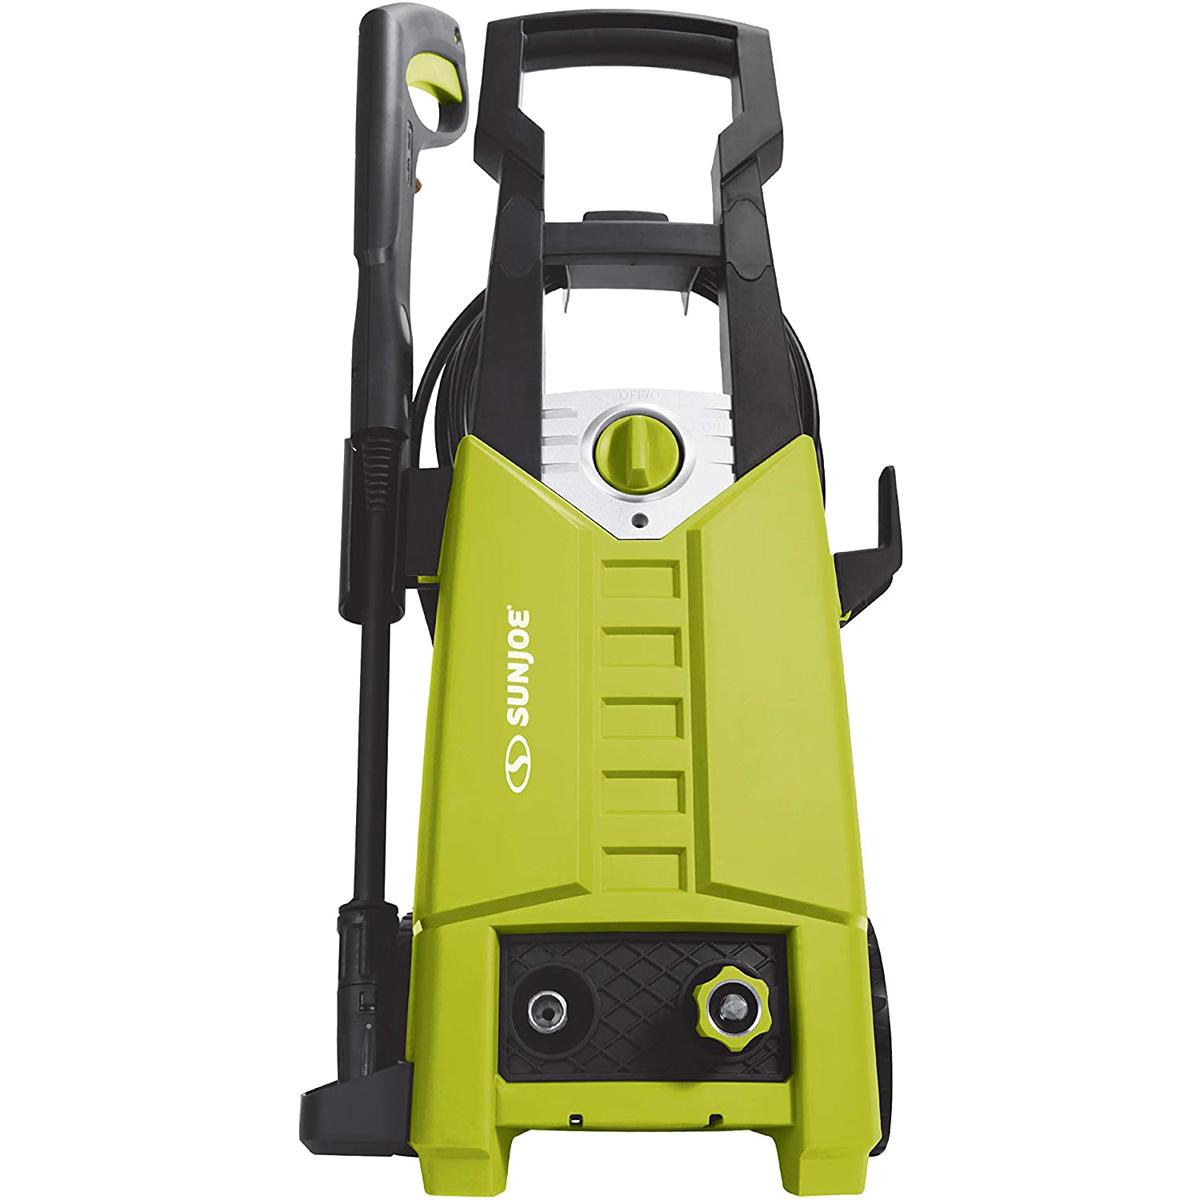 Sun Joe SPX2598 2000 PSI 1.65GPM 14.5A Electric Pressure Washer for $75 Shipped